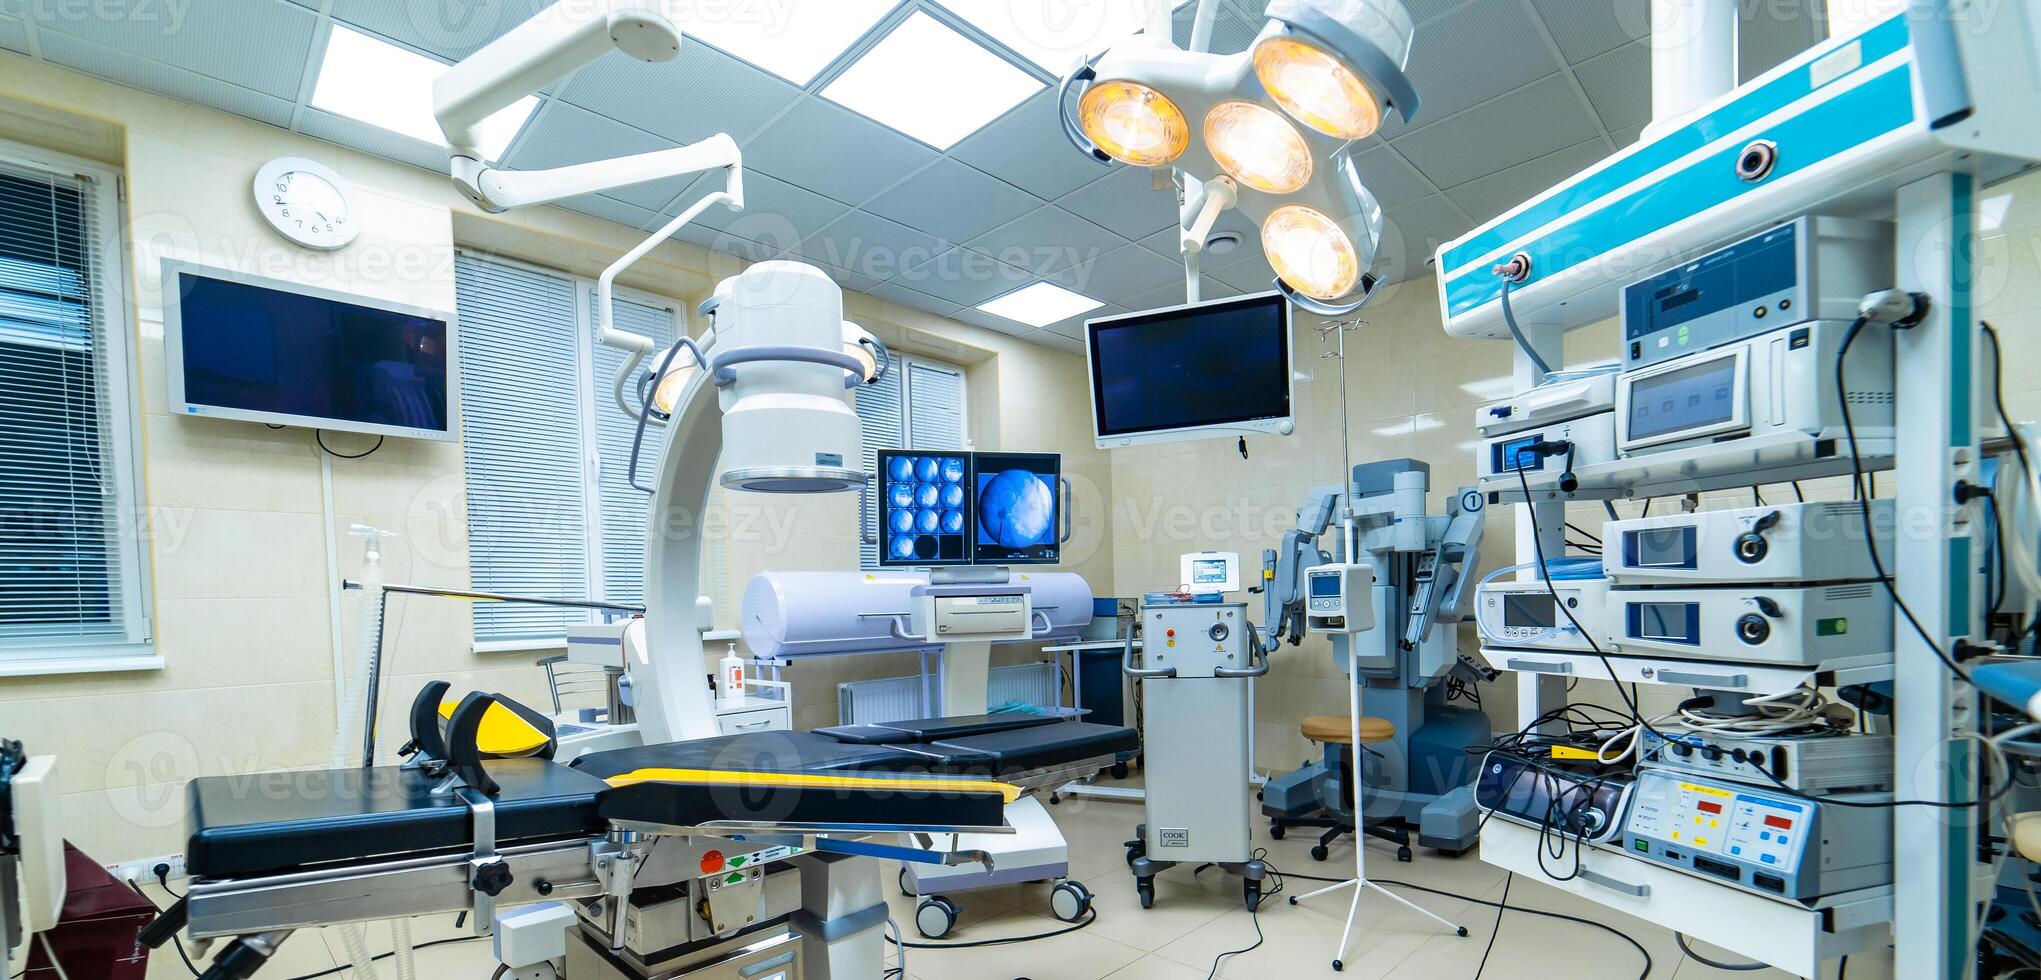 Surgery equipment and instruments in surgery operation room. instruments for microsurgery. Modern operating theatre. photo